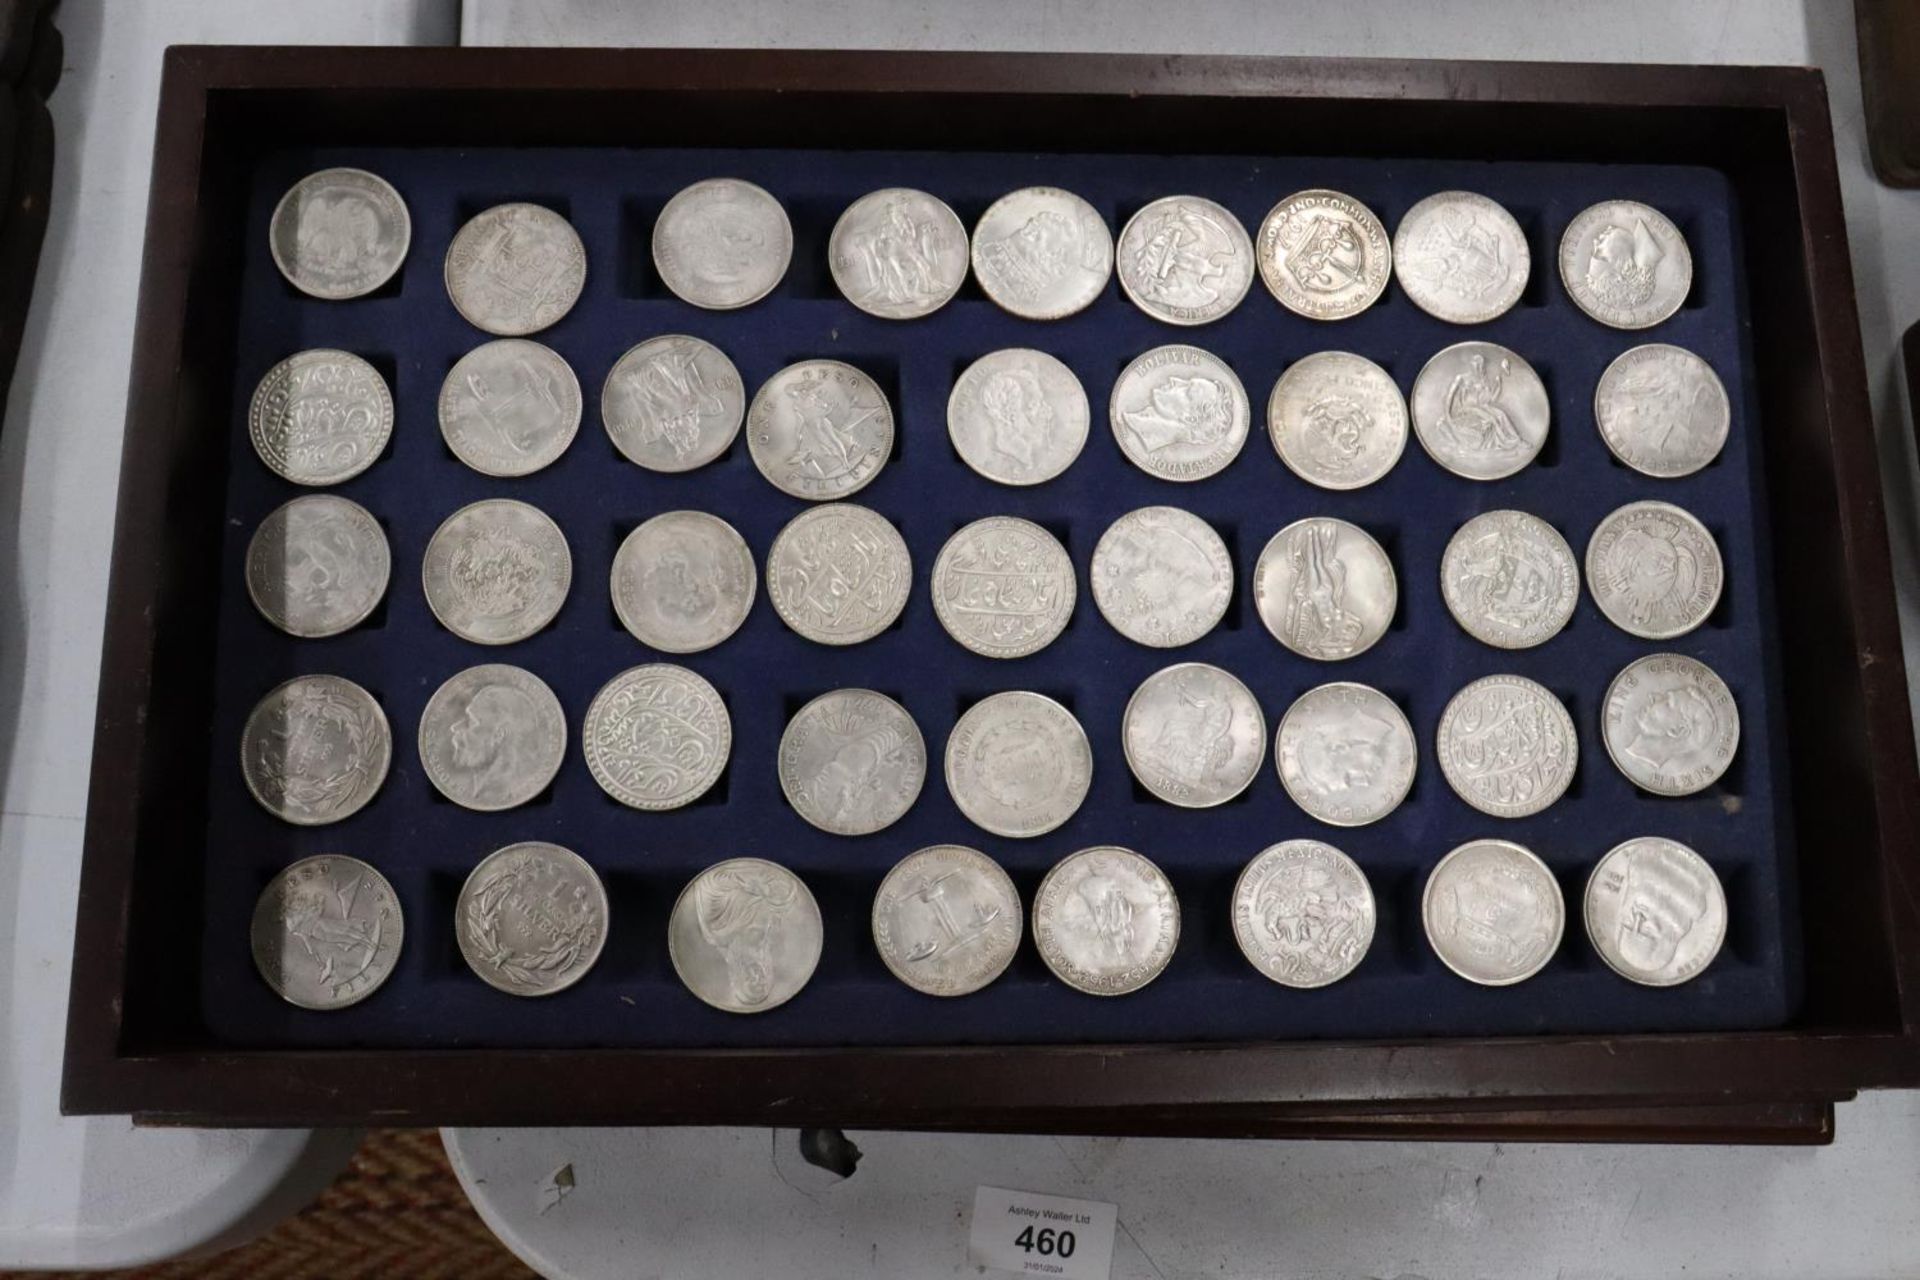 FORTY FOUR VARIOUS VINTAGE TOKENS/COINS IN A WOODEN BOX